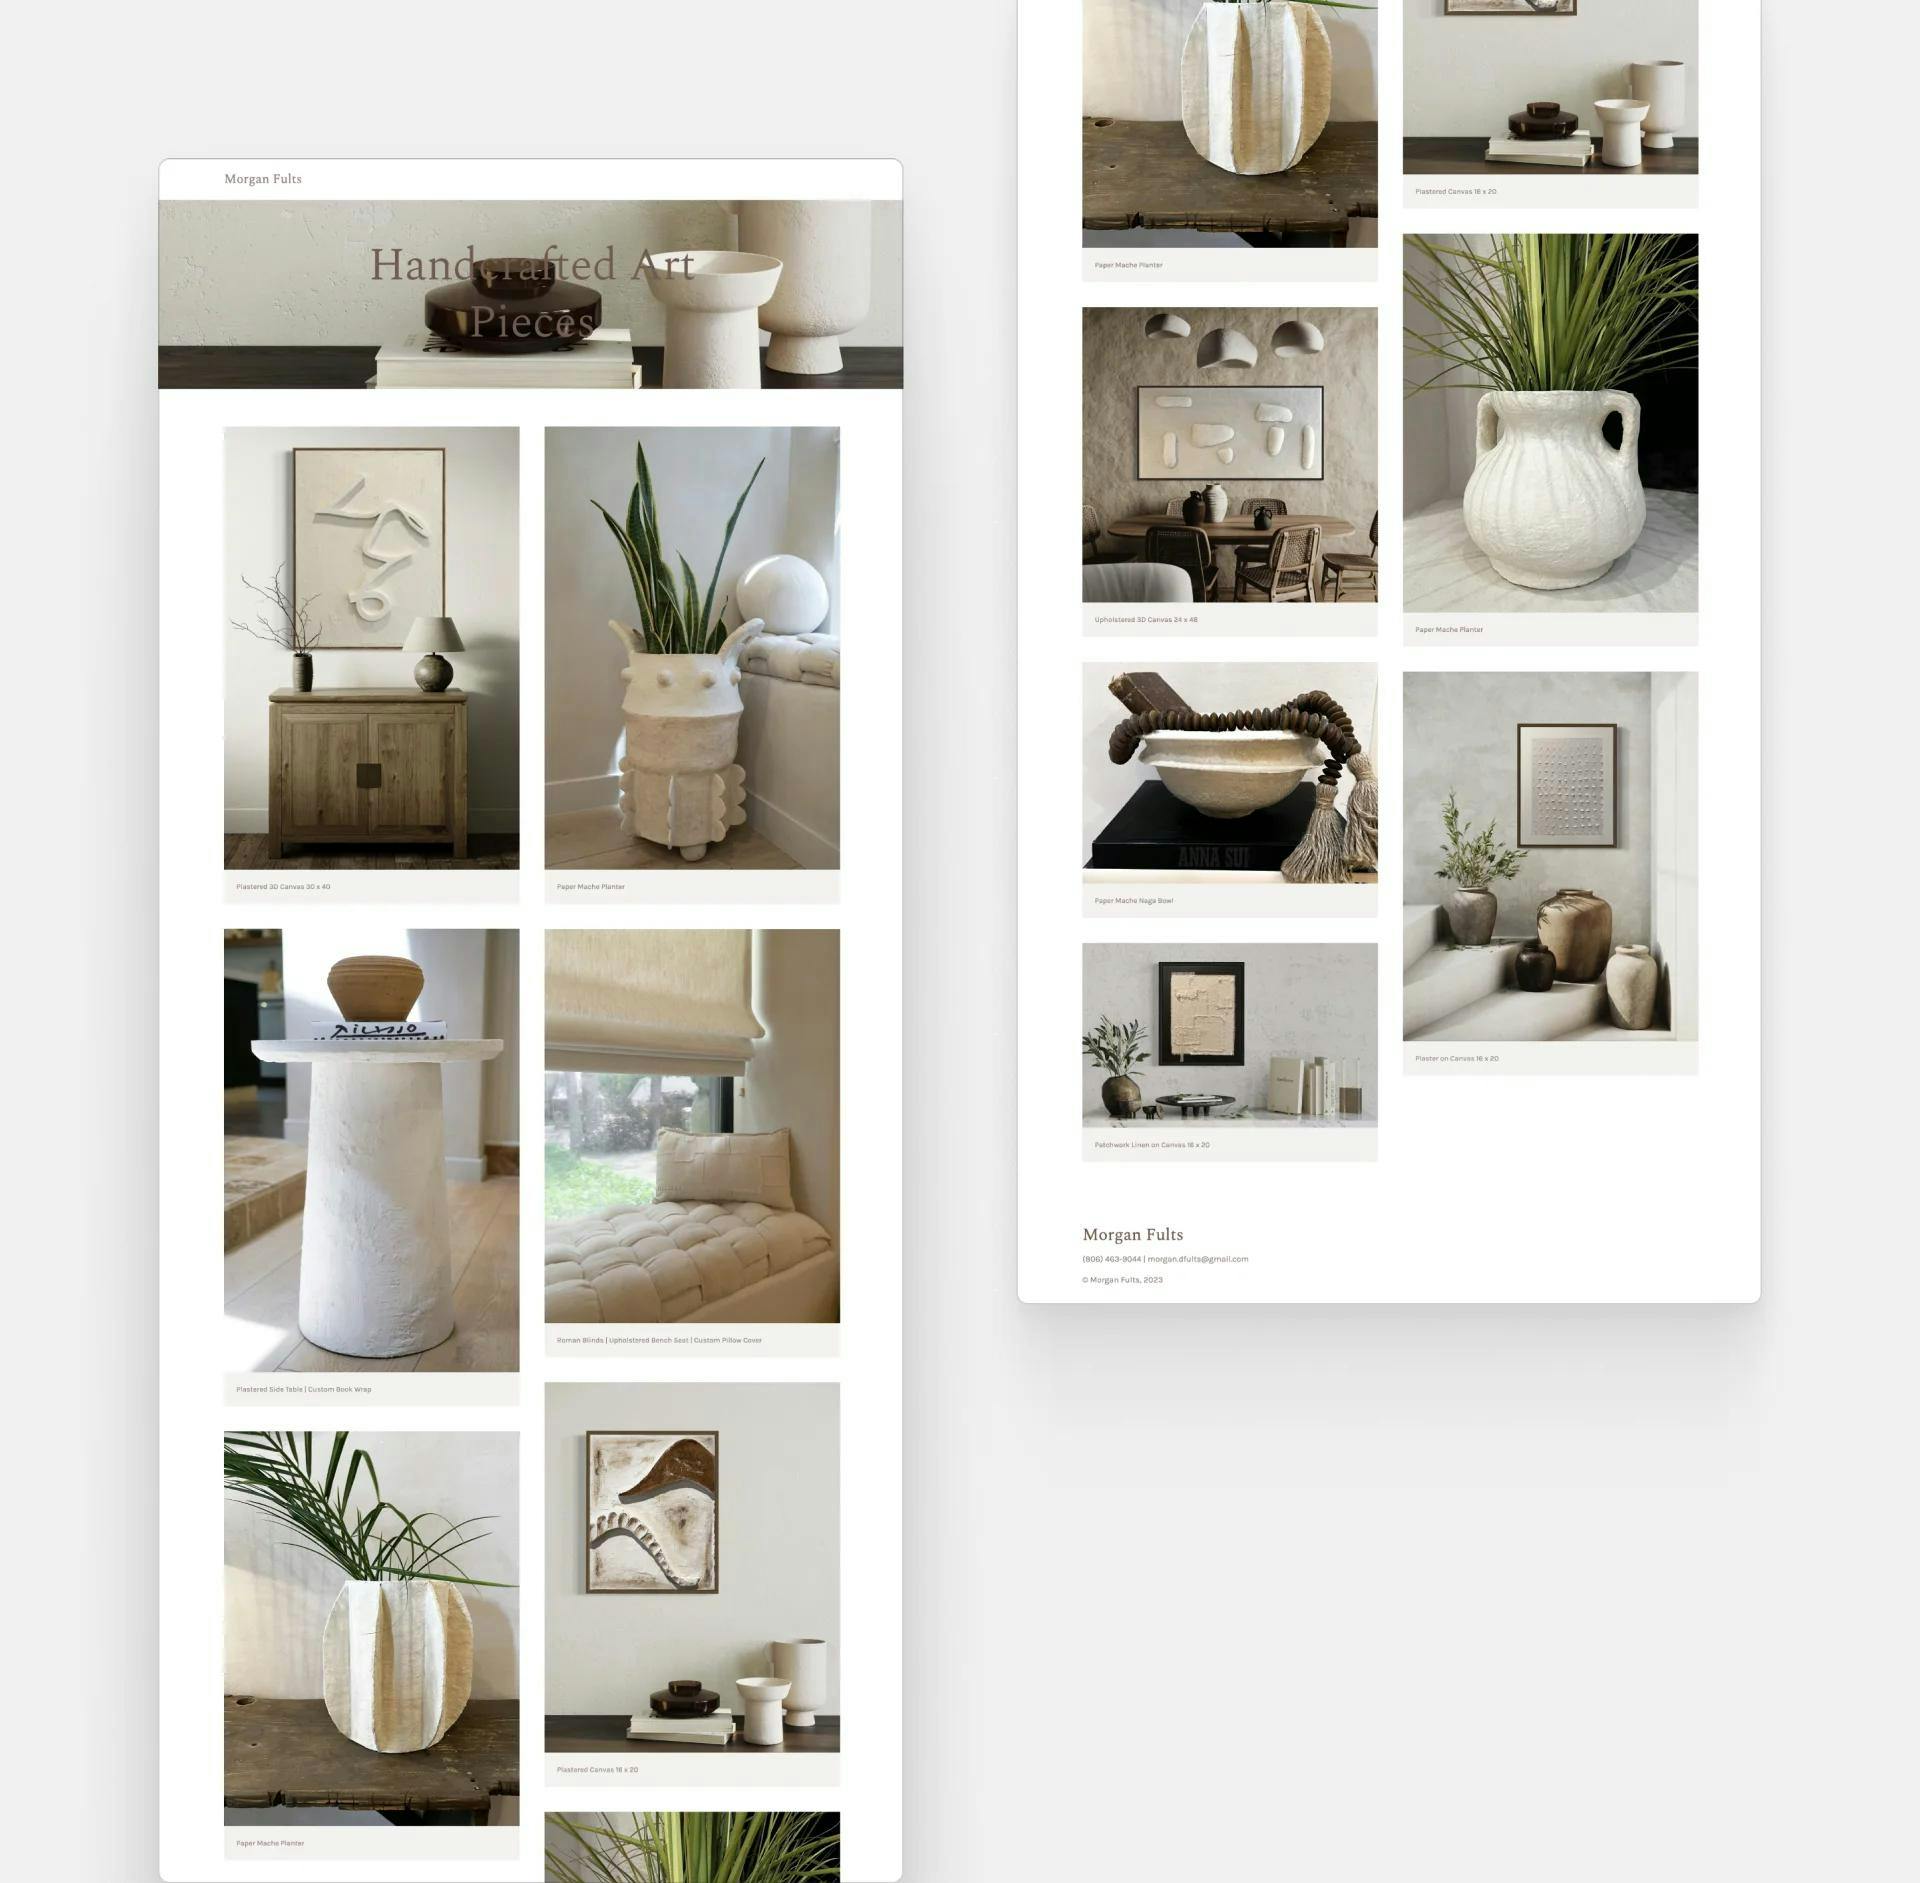 Screenshot of Morgan Fults' page where she showcases her artworks in her interior design portfolio